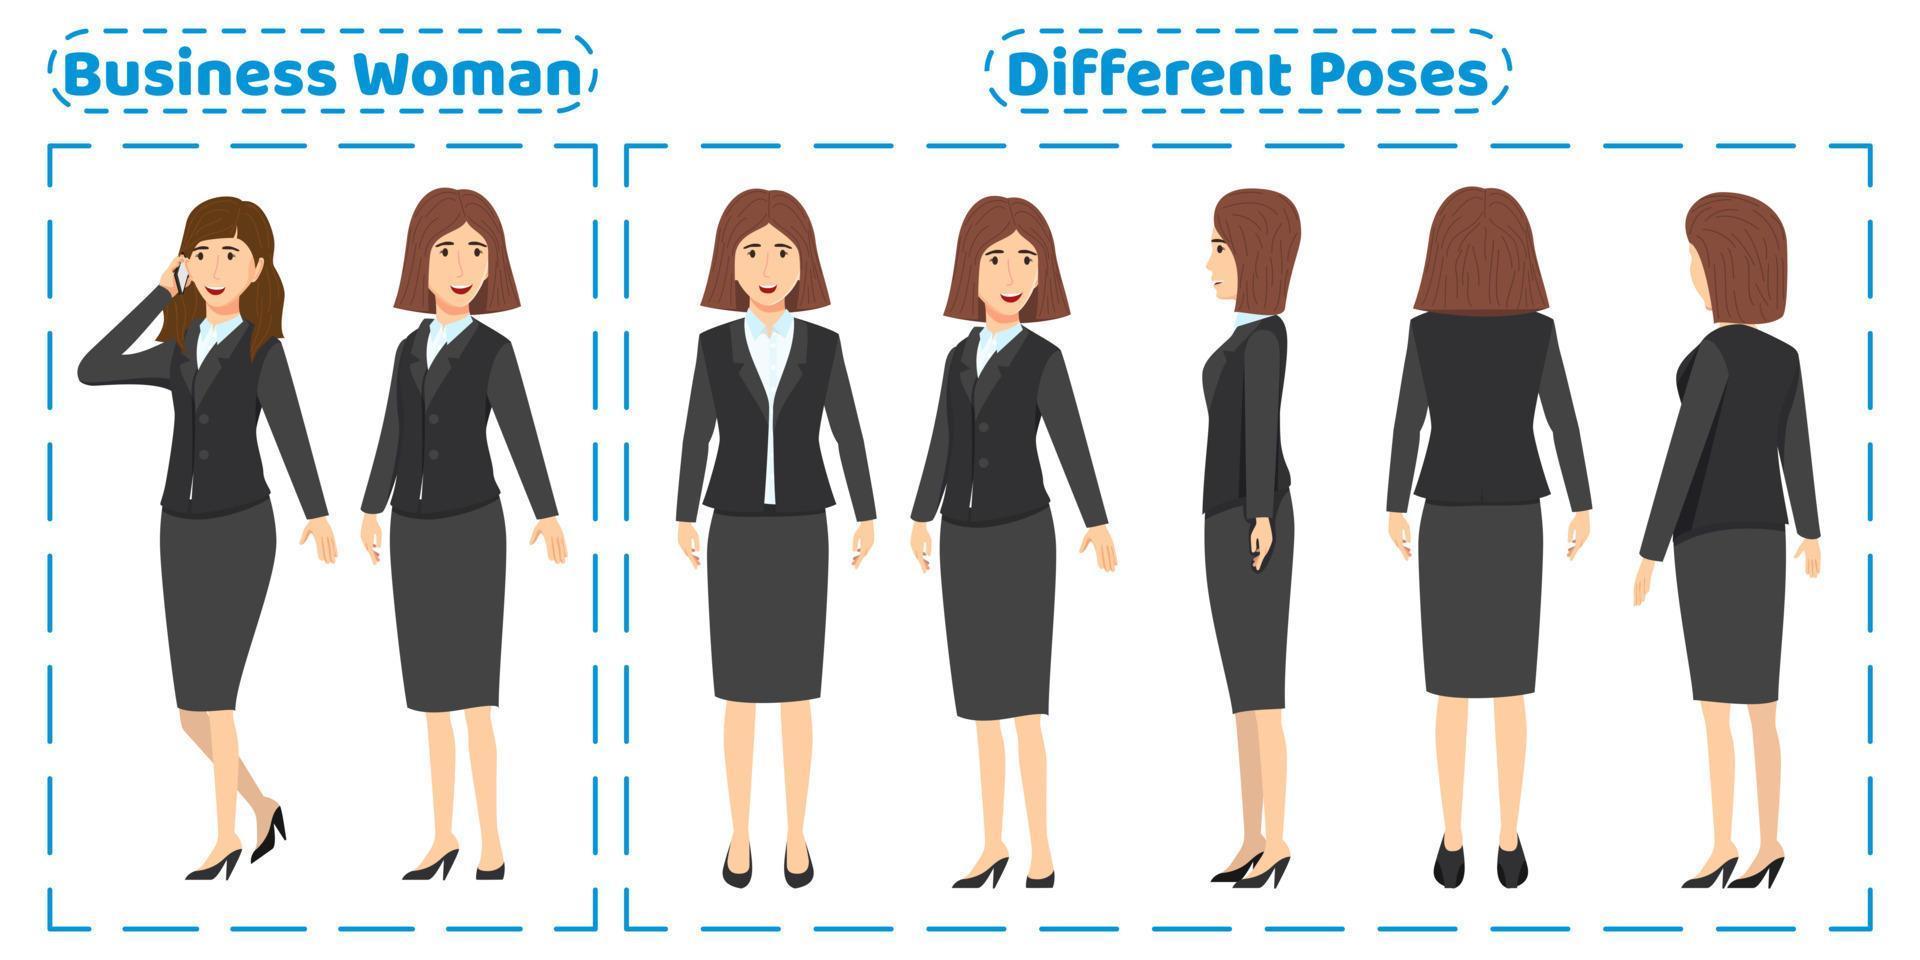 Business woman character set with different poses front side back view with cheerful facial expressions Animation creation isolated vector